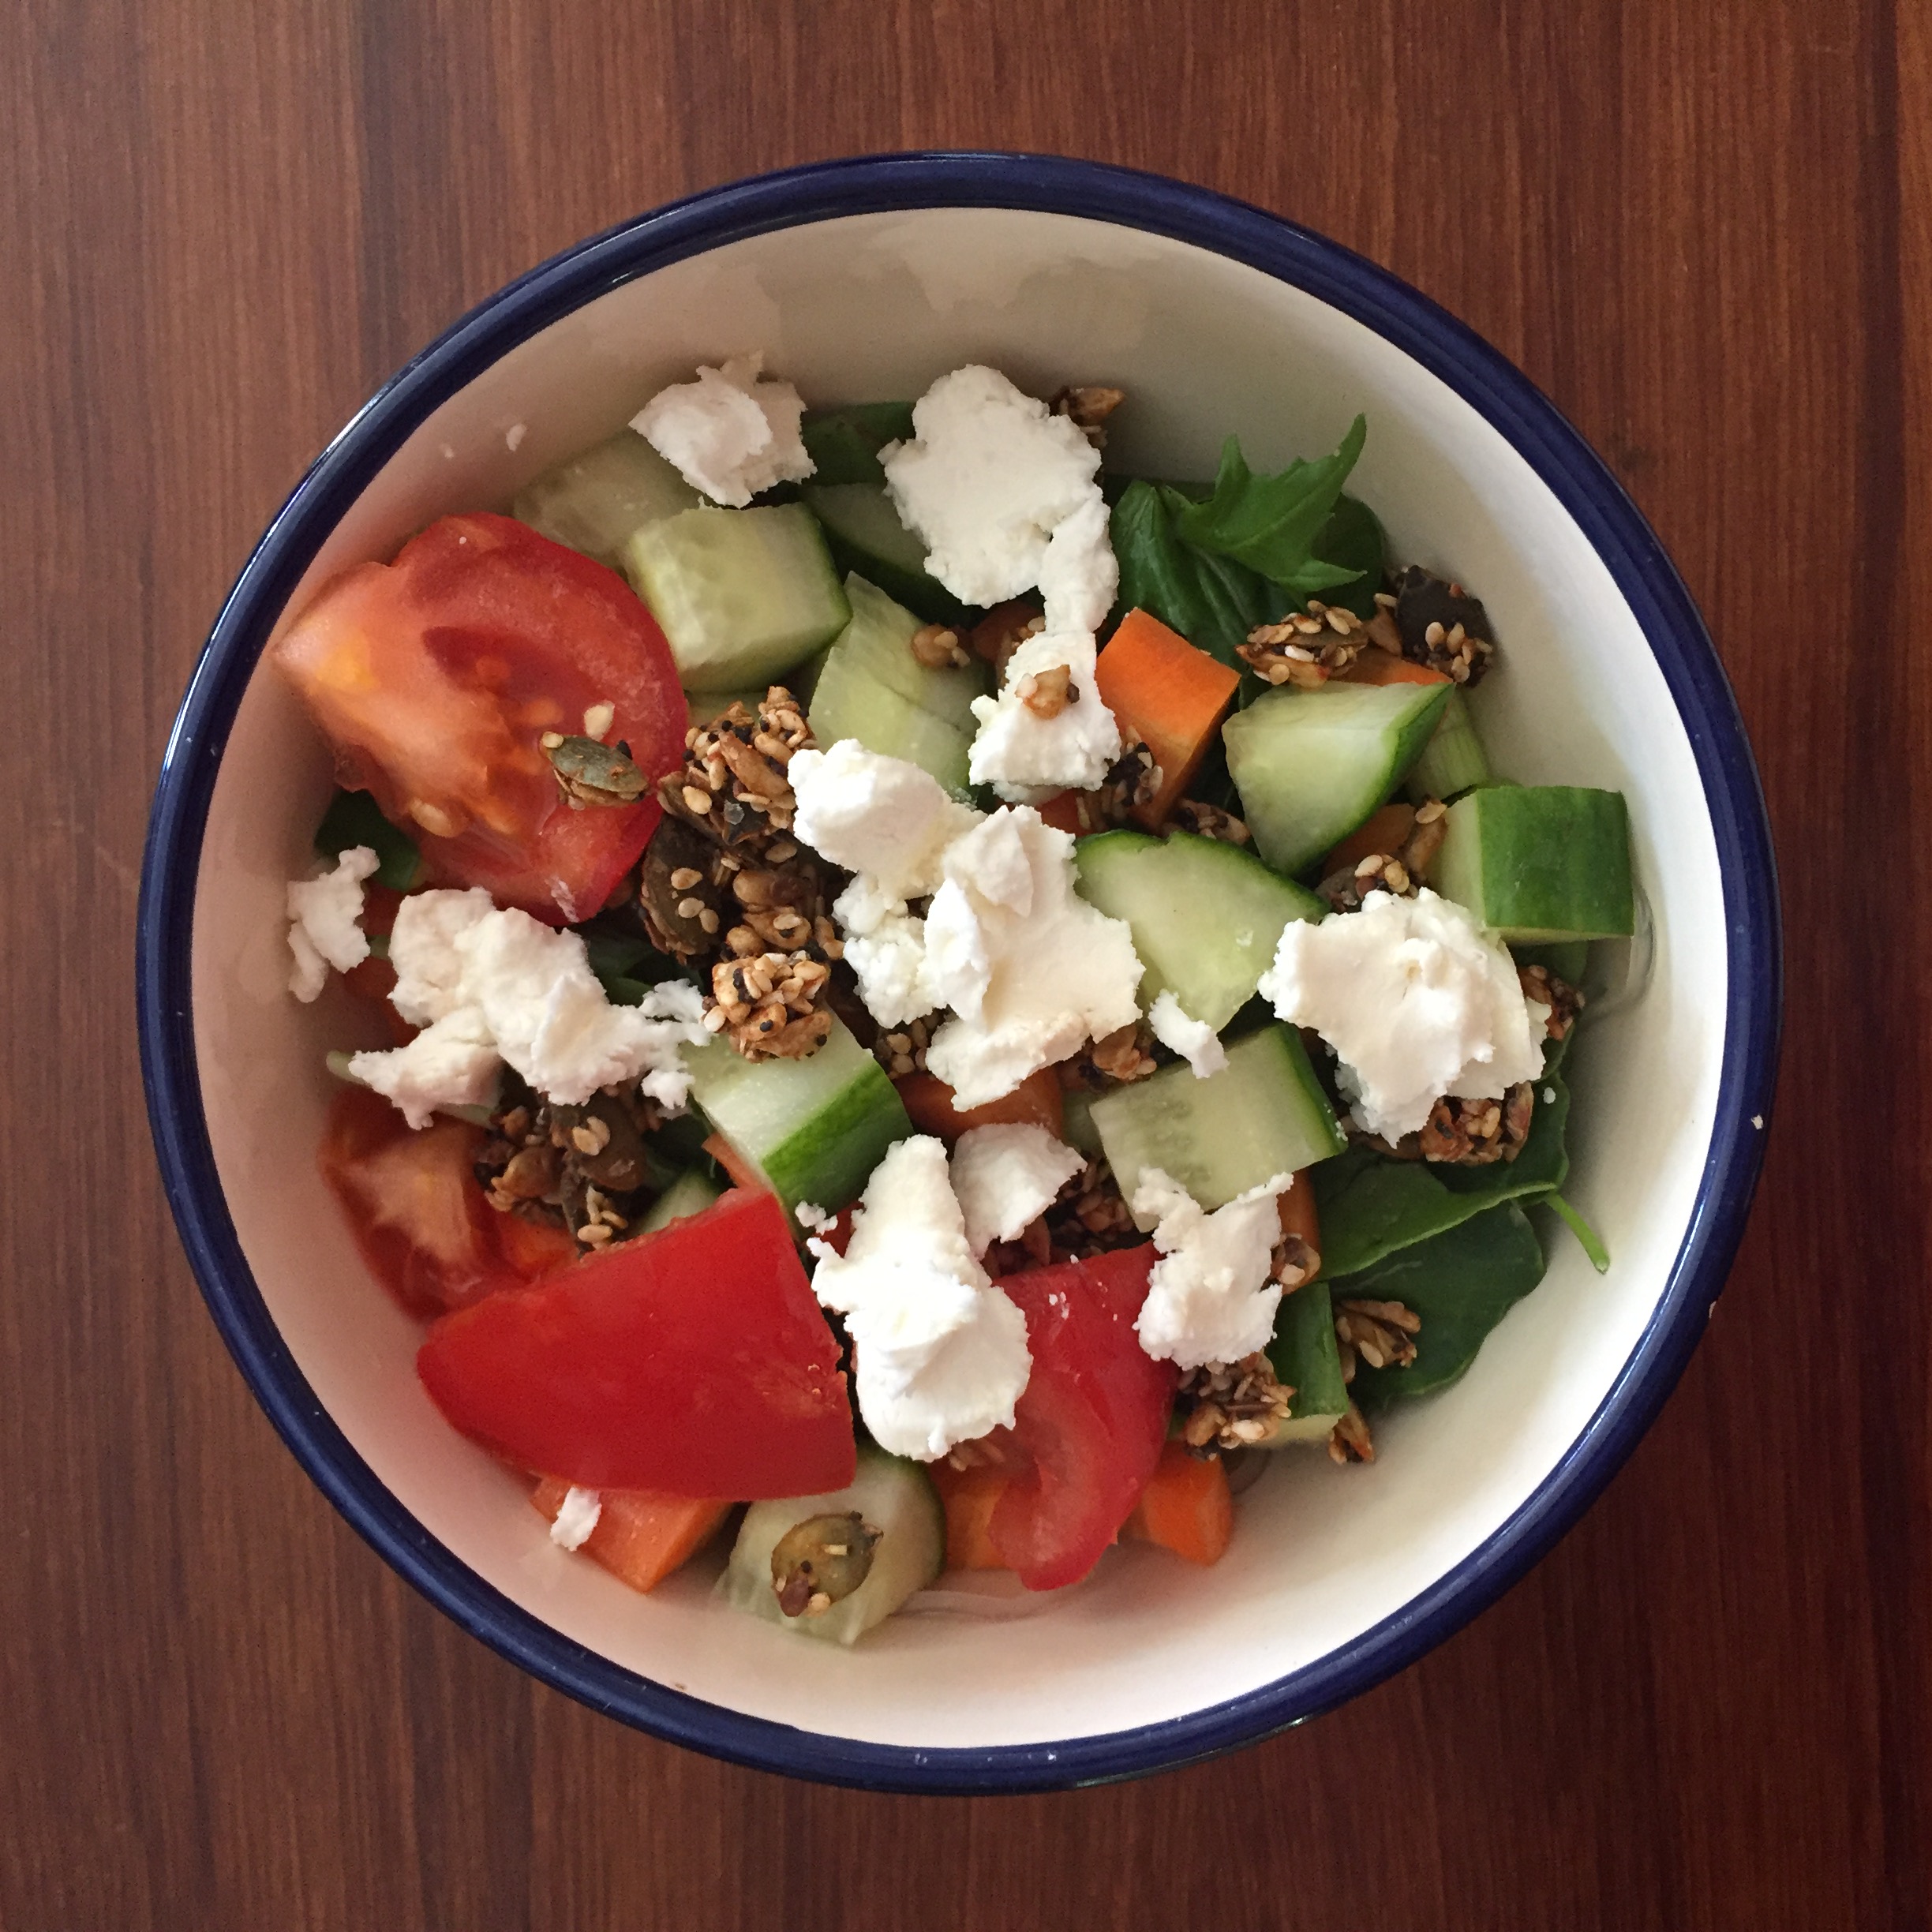 Recipe of the week: The Salad of all Salads